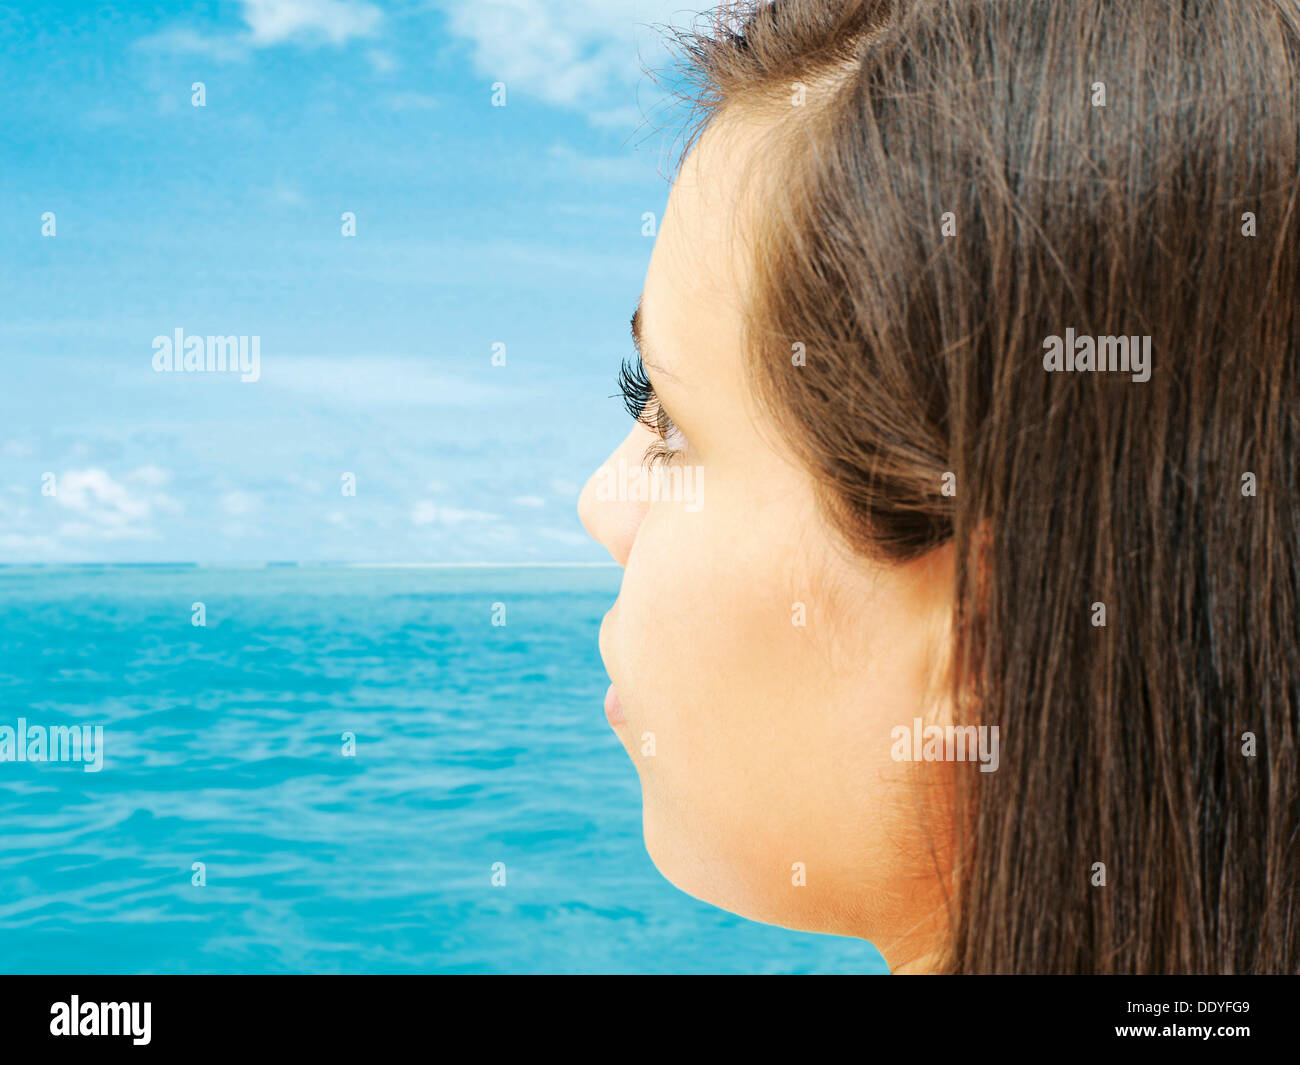 Young Indian woman looking at the Indian Ocean Stock Photo